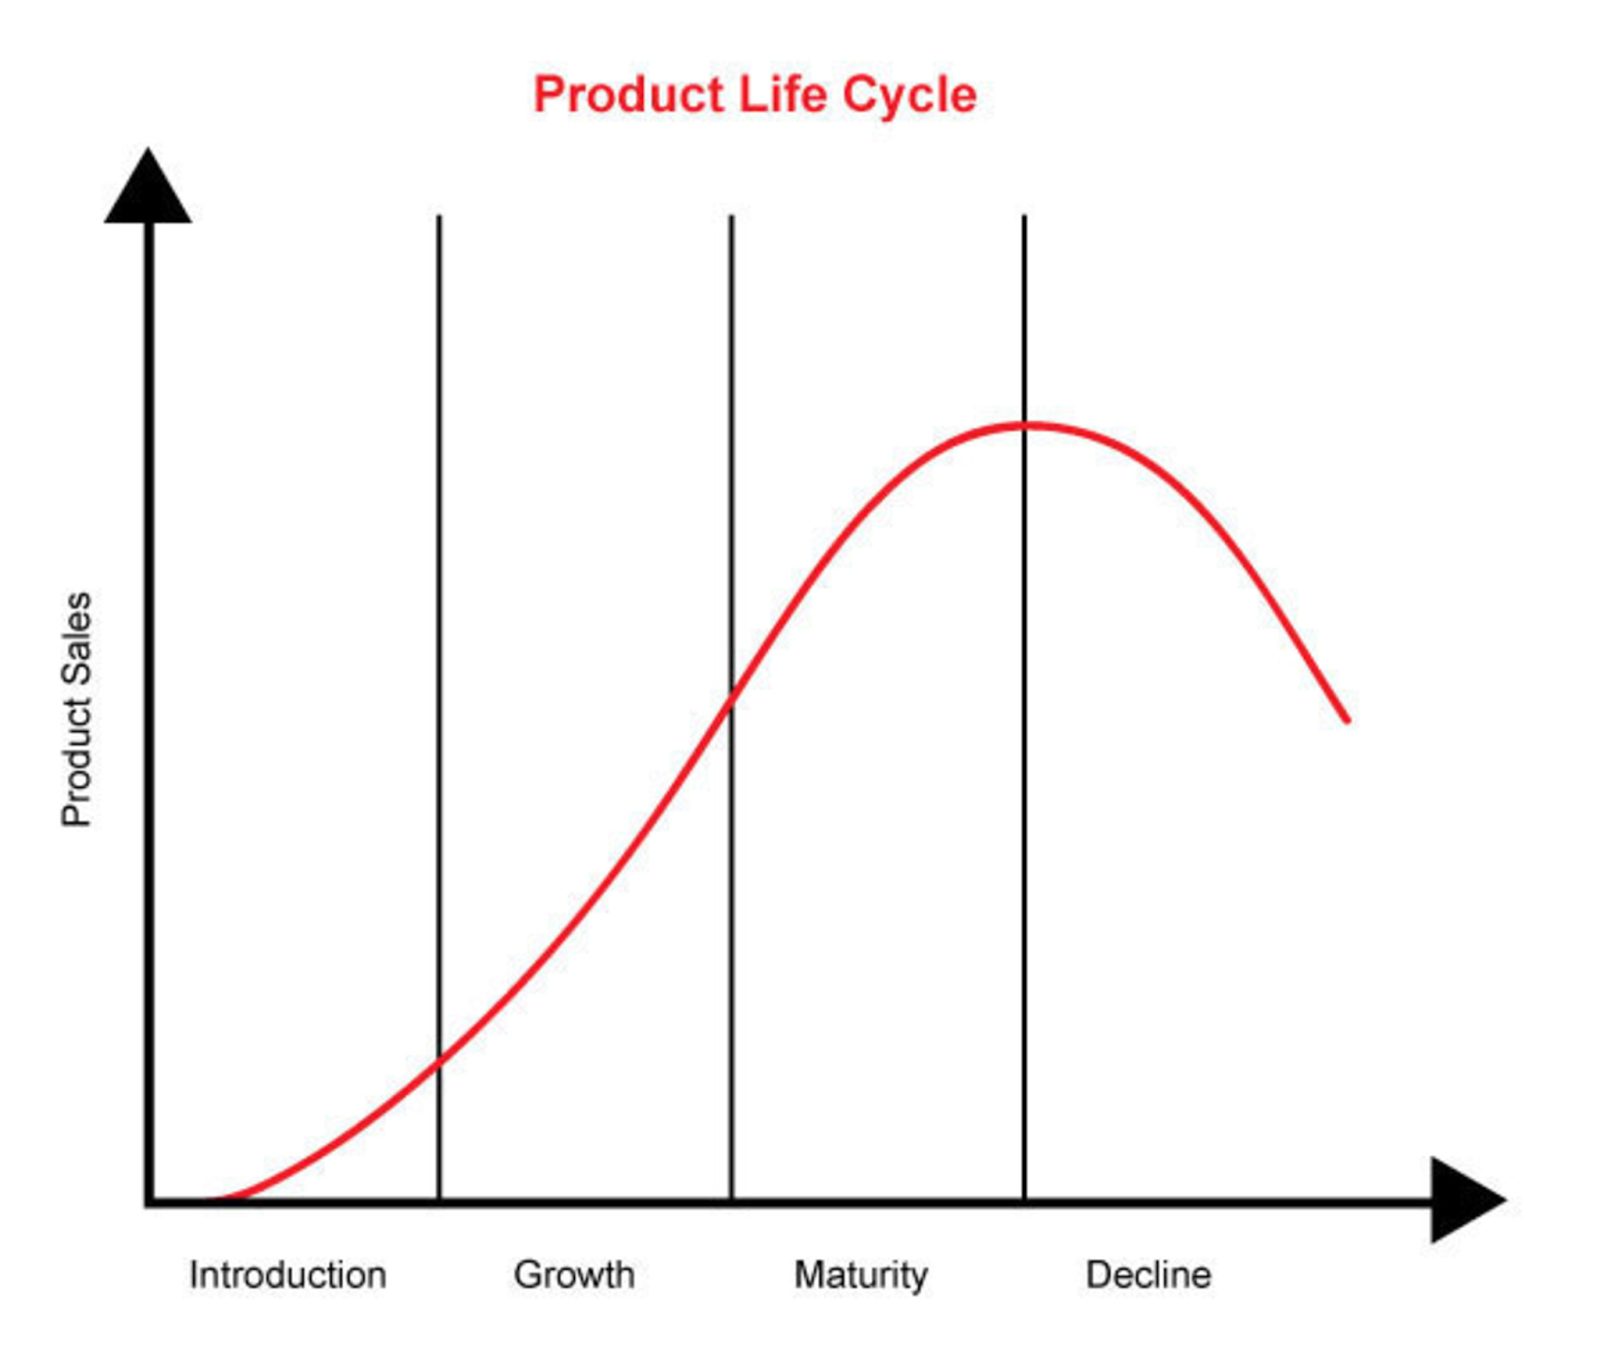 Marketing Objectives for the Product Lifecycle Growth Stage